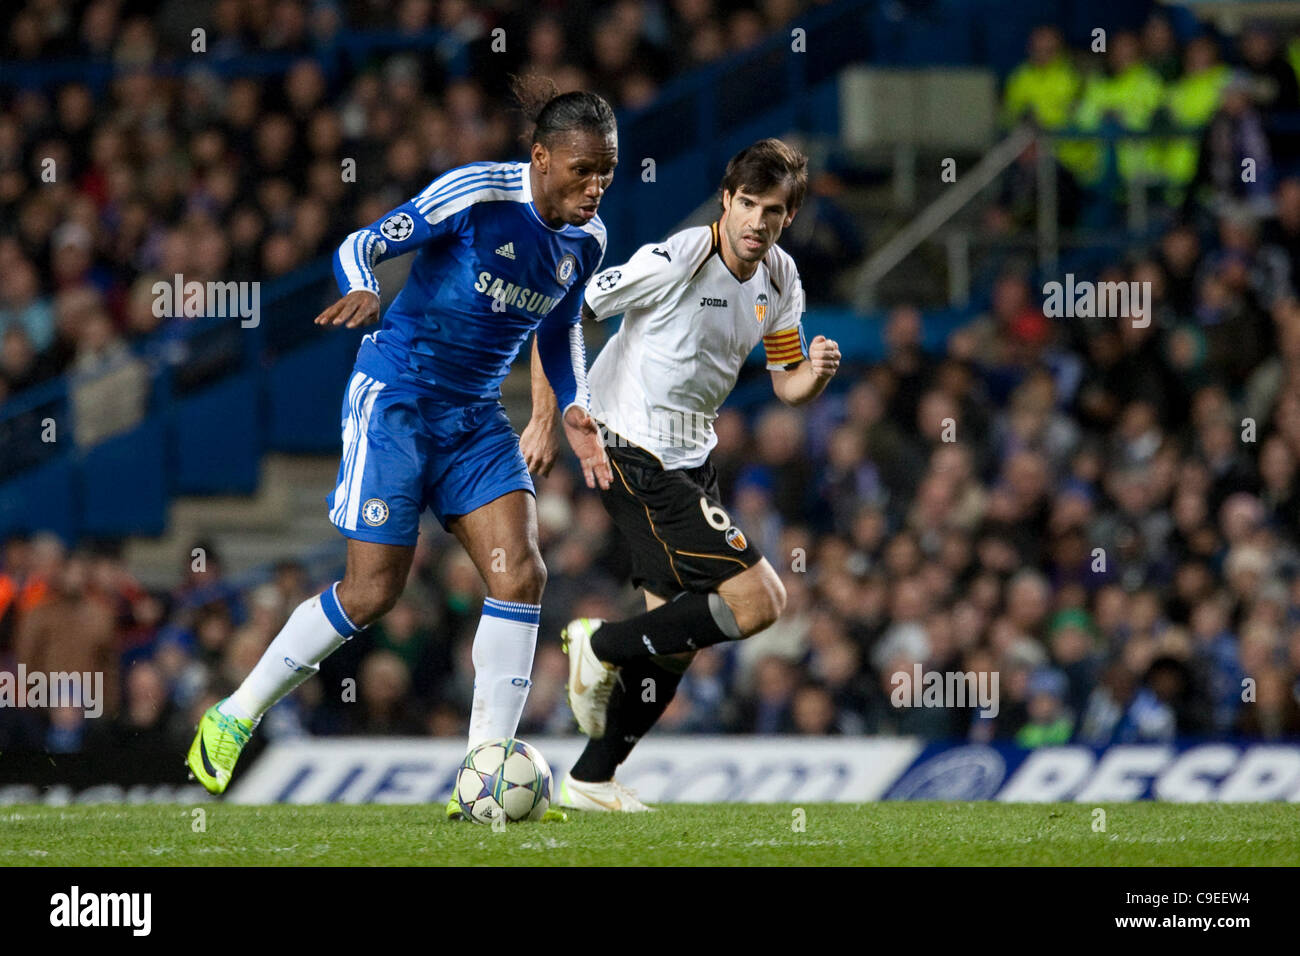 06.12.2011. London, England. Chelsea's Ivory Coast forward Didier Drogba and Valencia's Spanish midfielder David Albelda  in action during the UEFA Champions League group match between Chelsea and Valencia from Spain, played at Stamford Bridge Stadium. Stock Photo